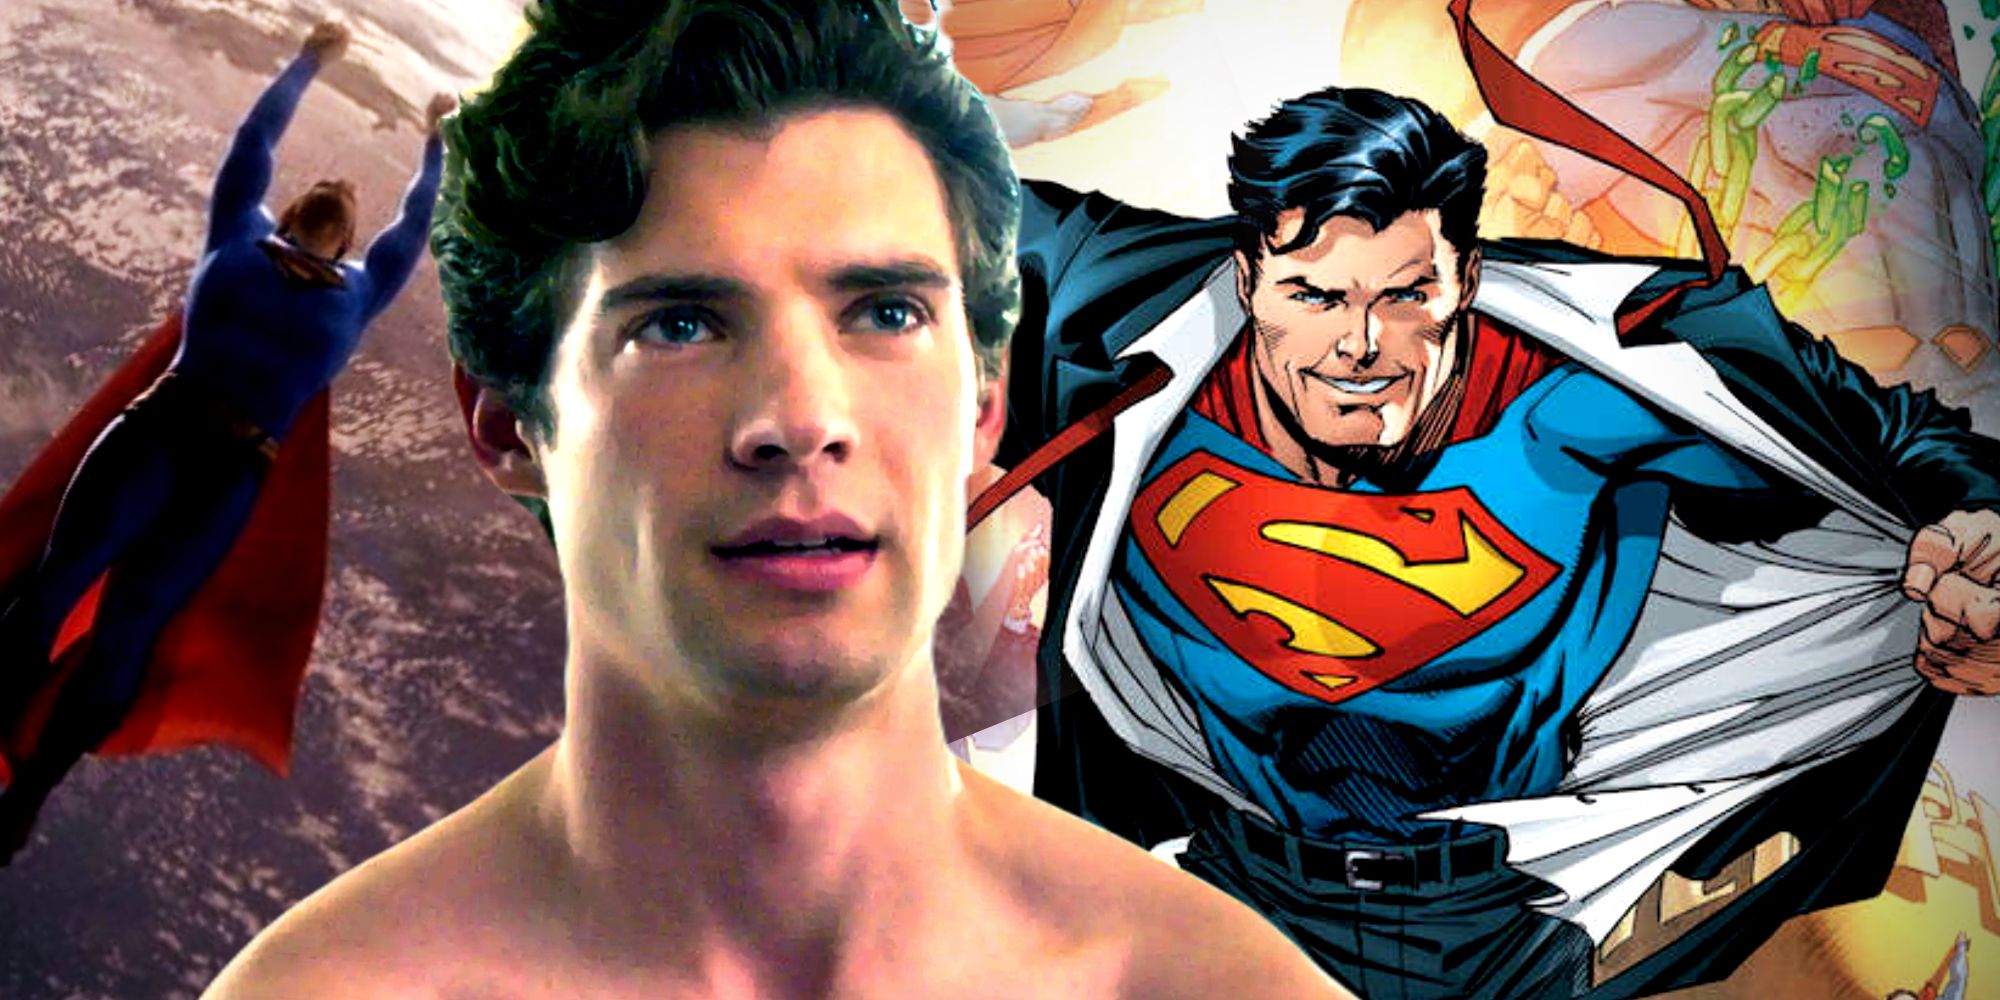 David Corenswet Shirtless in The Politician and Superman Ripping His Shirt in DC Comics